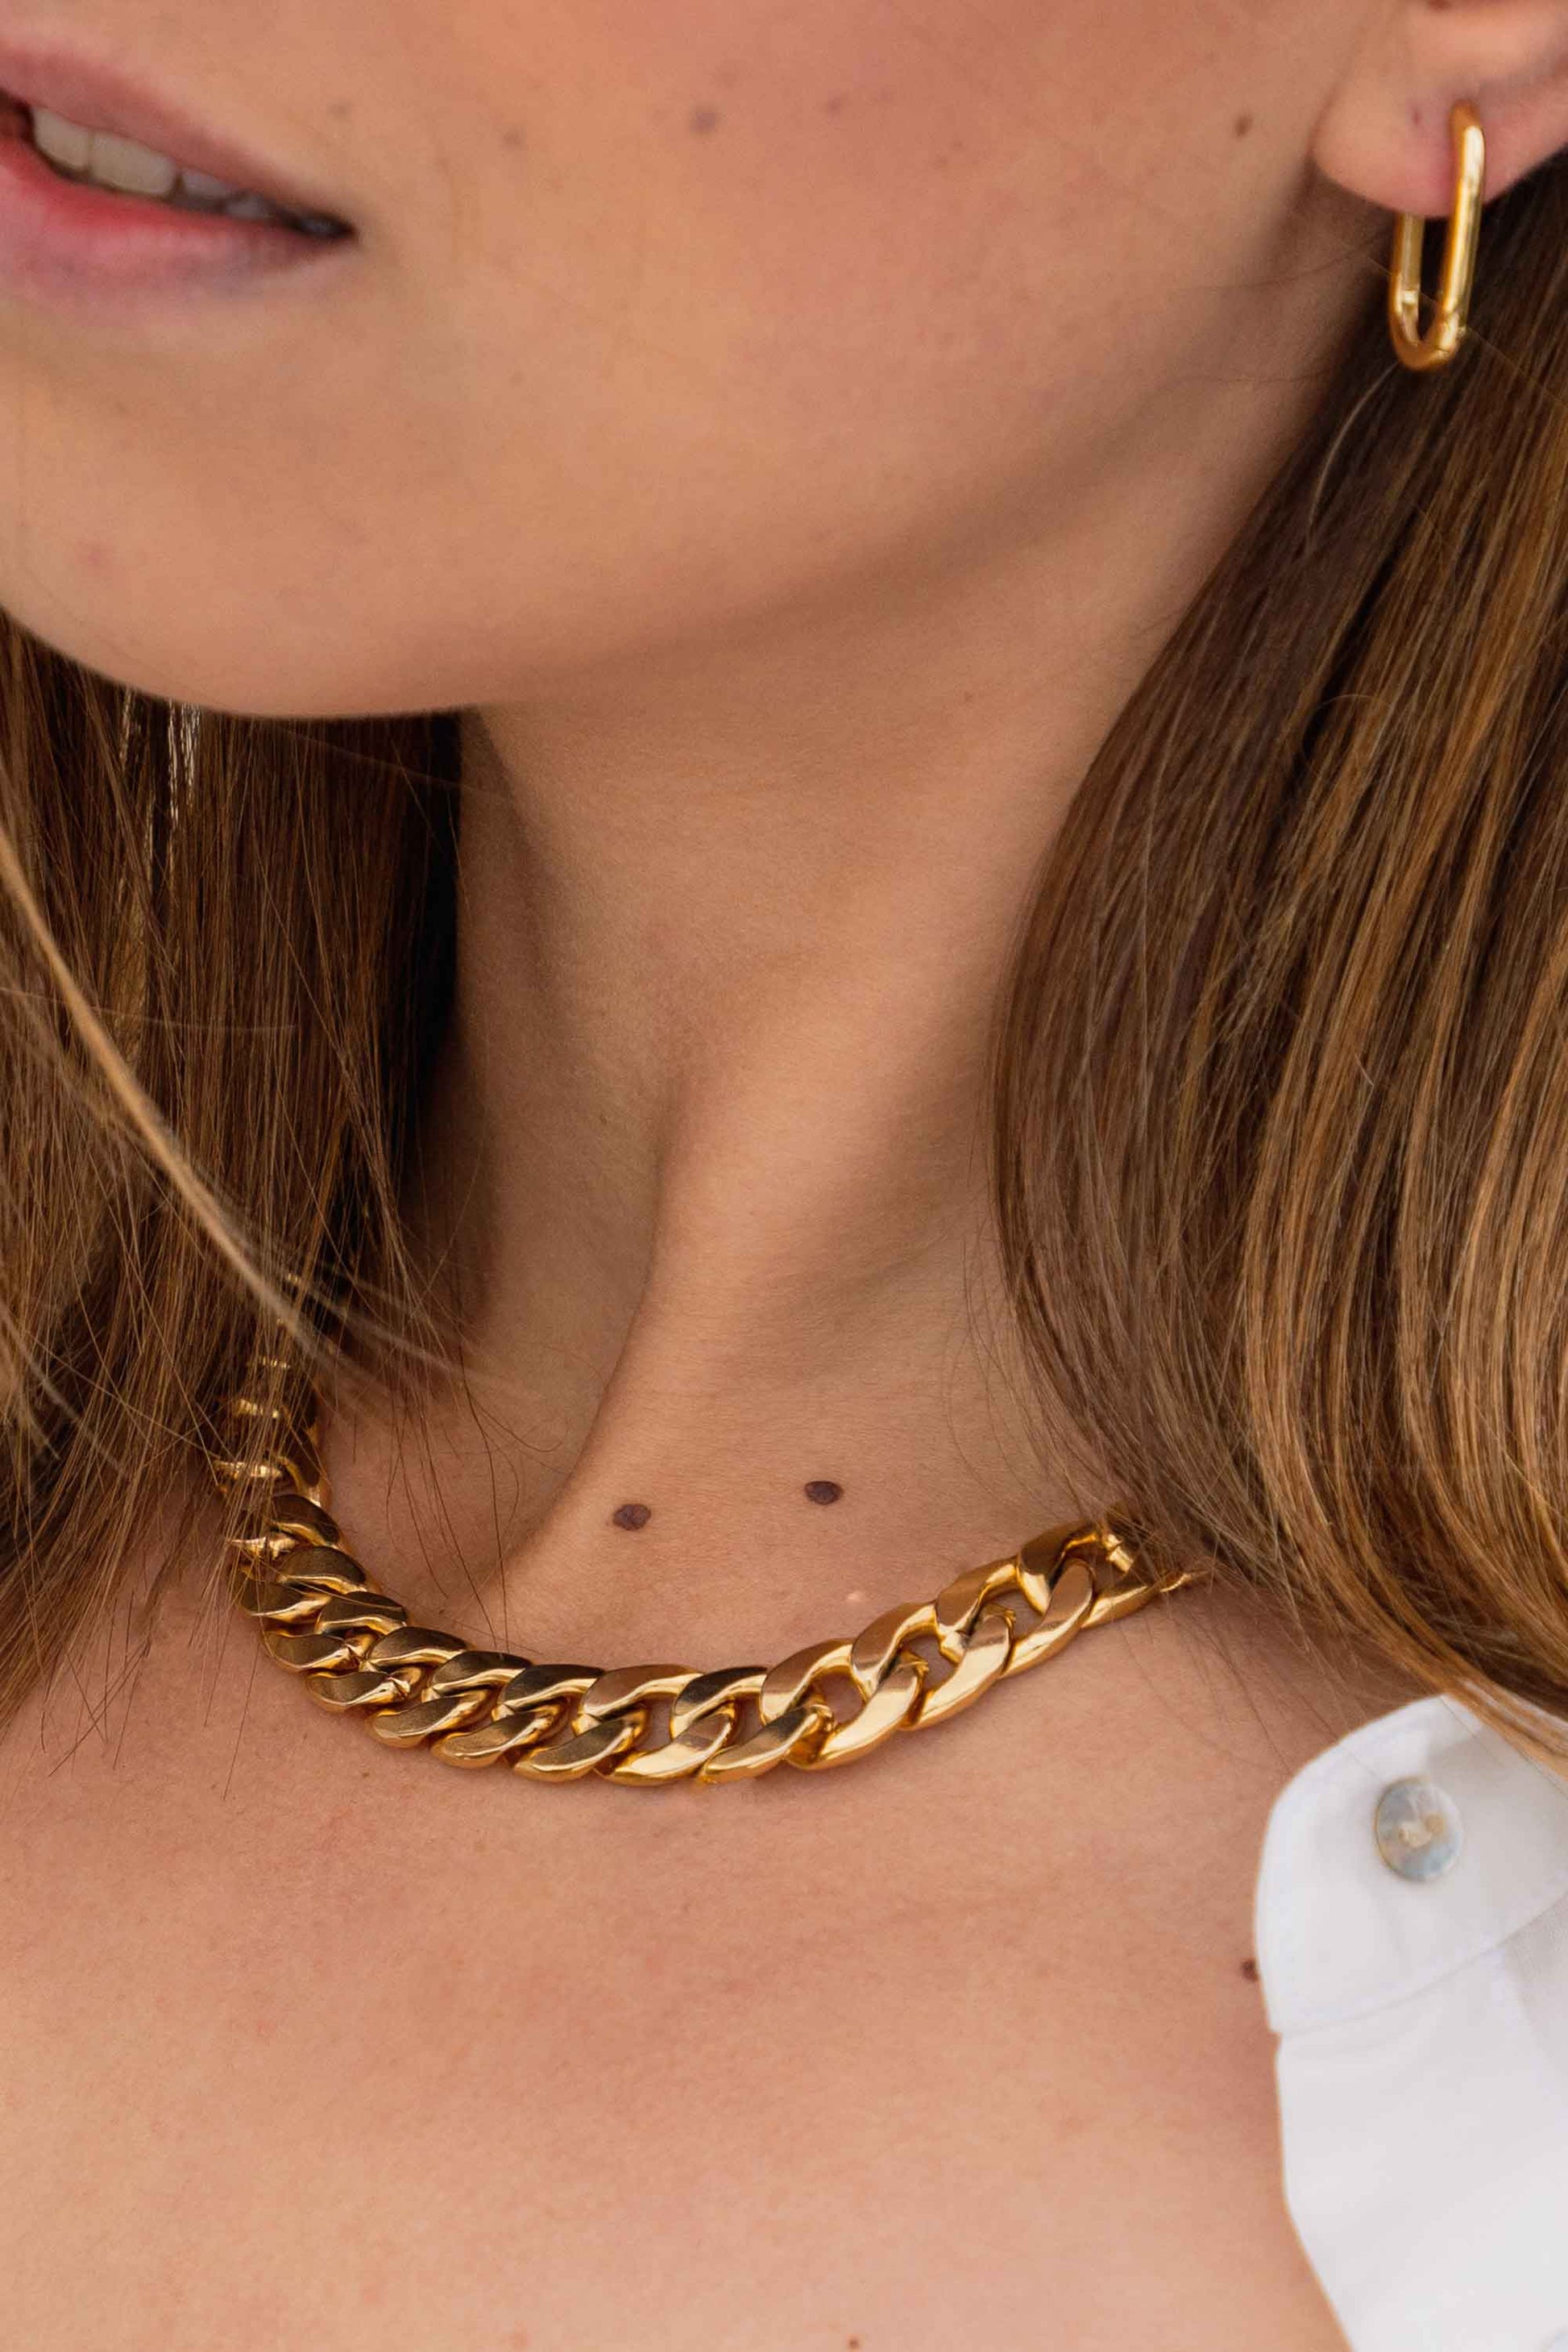 chunky-gold-cuban-curb-statement-necklace-chain-on-body-close